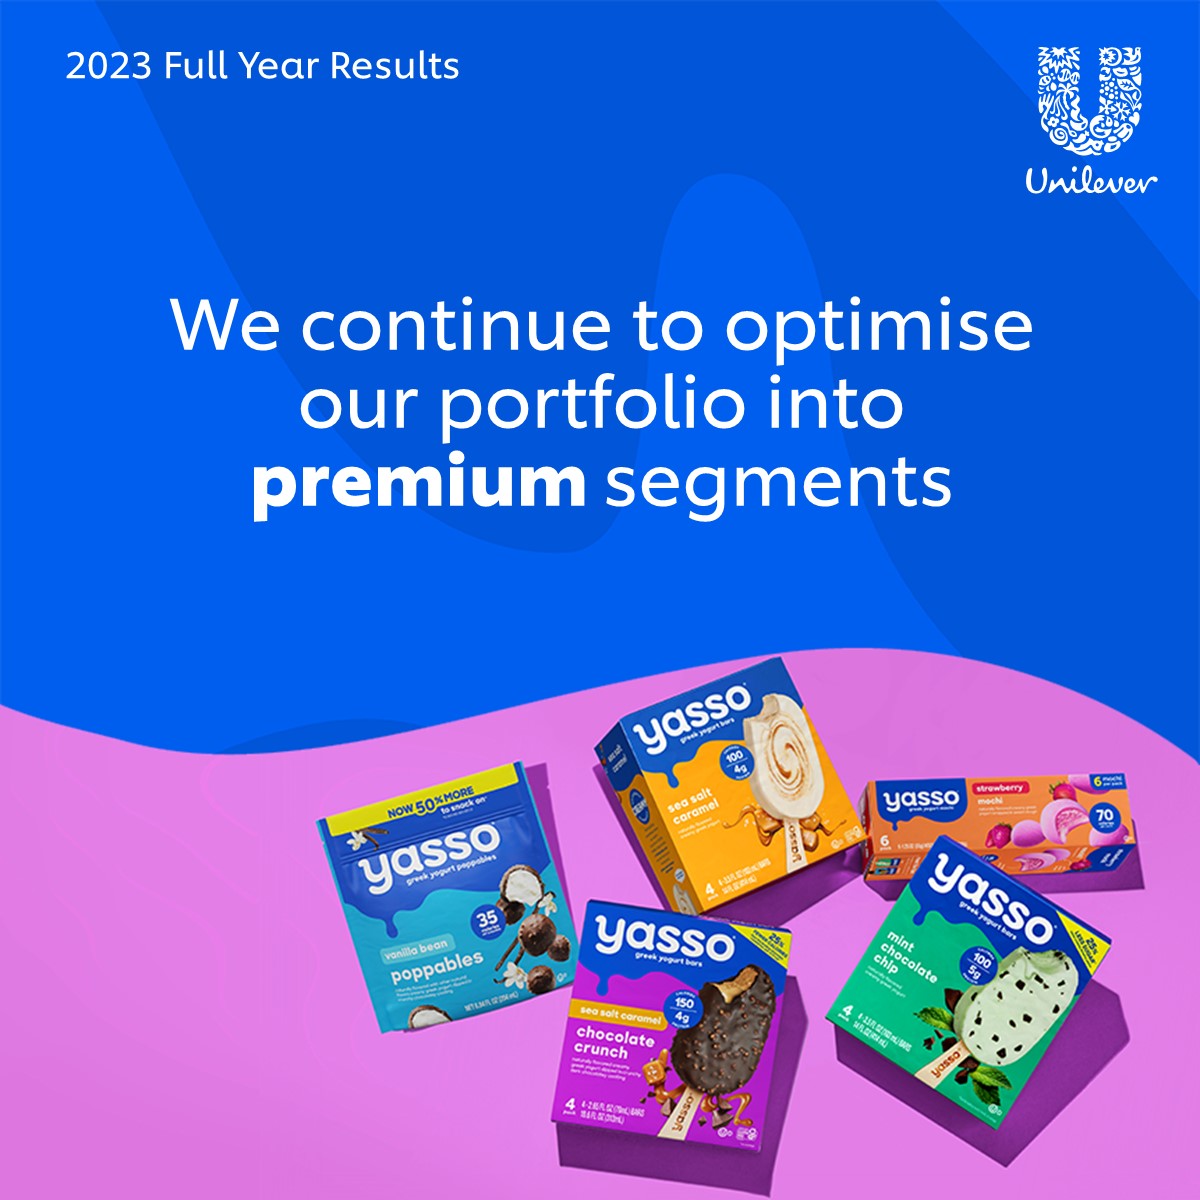 2023 Full Year Results

This year, we announced the acquisitions of K18 and Yasso, and disposals of Elida Beauty, Dollar Shave Club and Suave in North America.

Read more here: unilever.com/news/press-and…

#UnileverResults $ULVR $UNA $UL